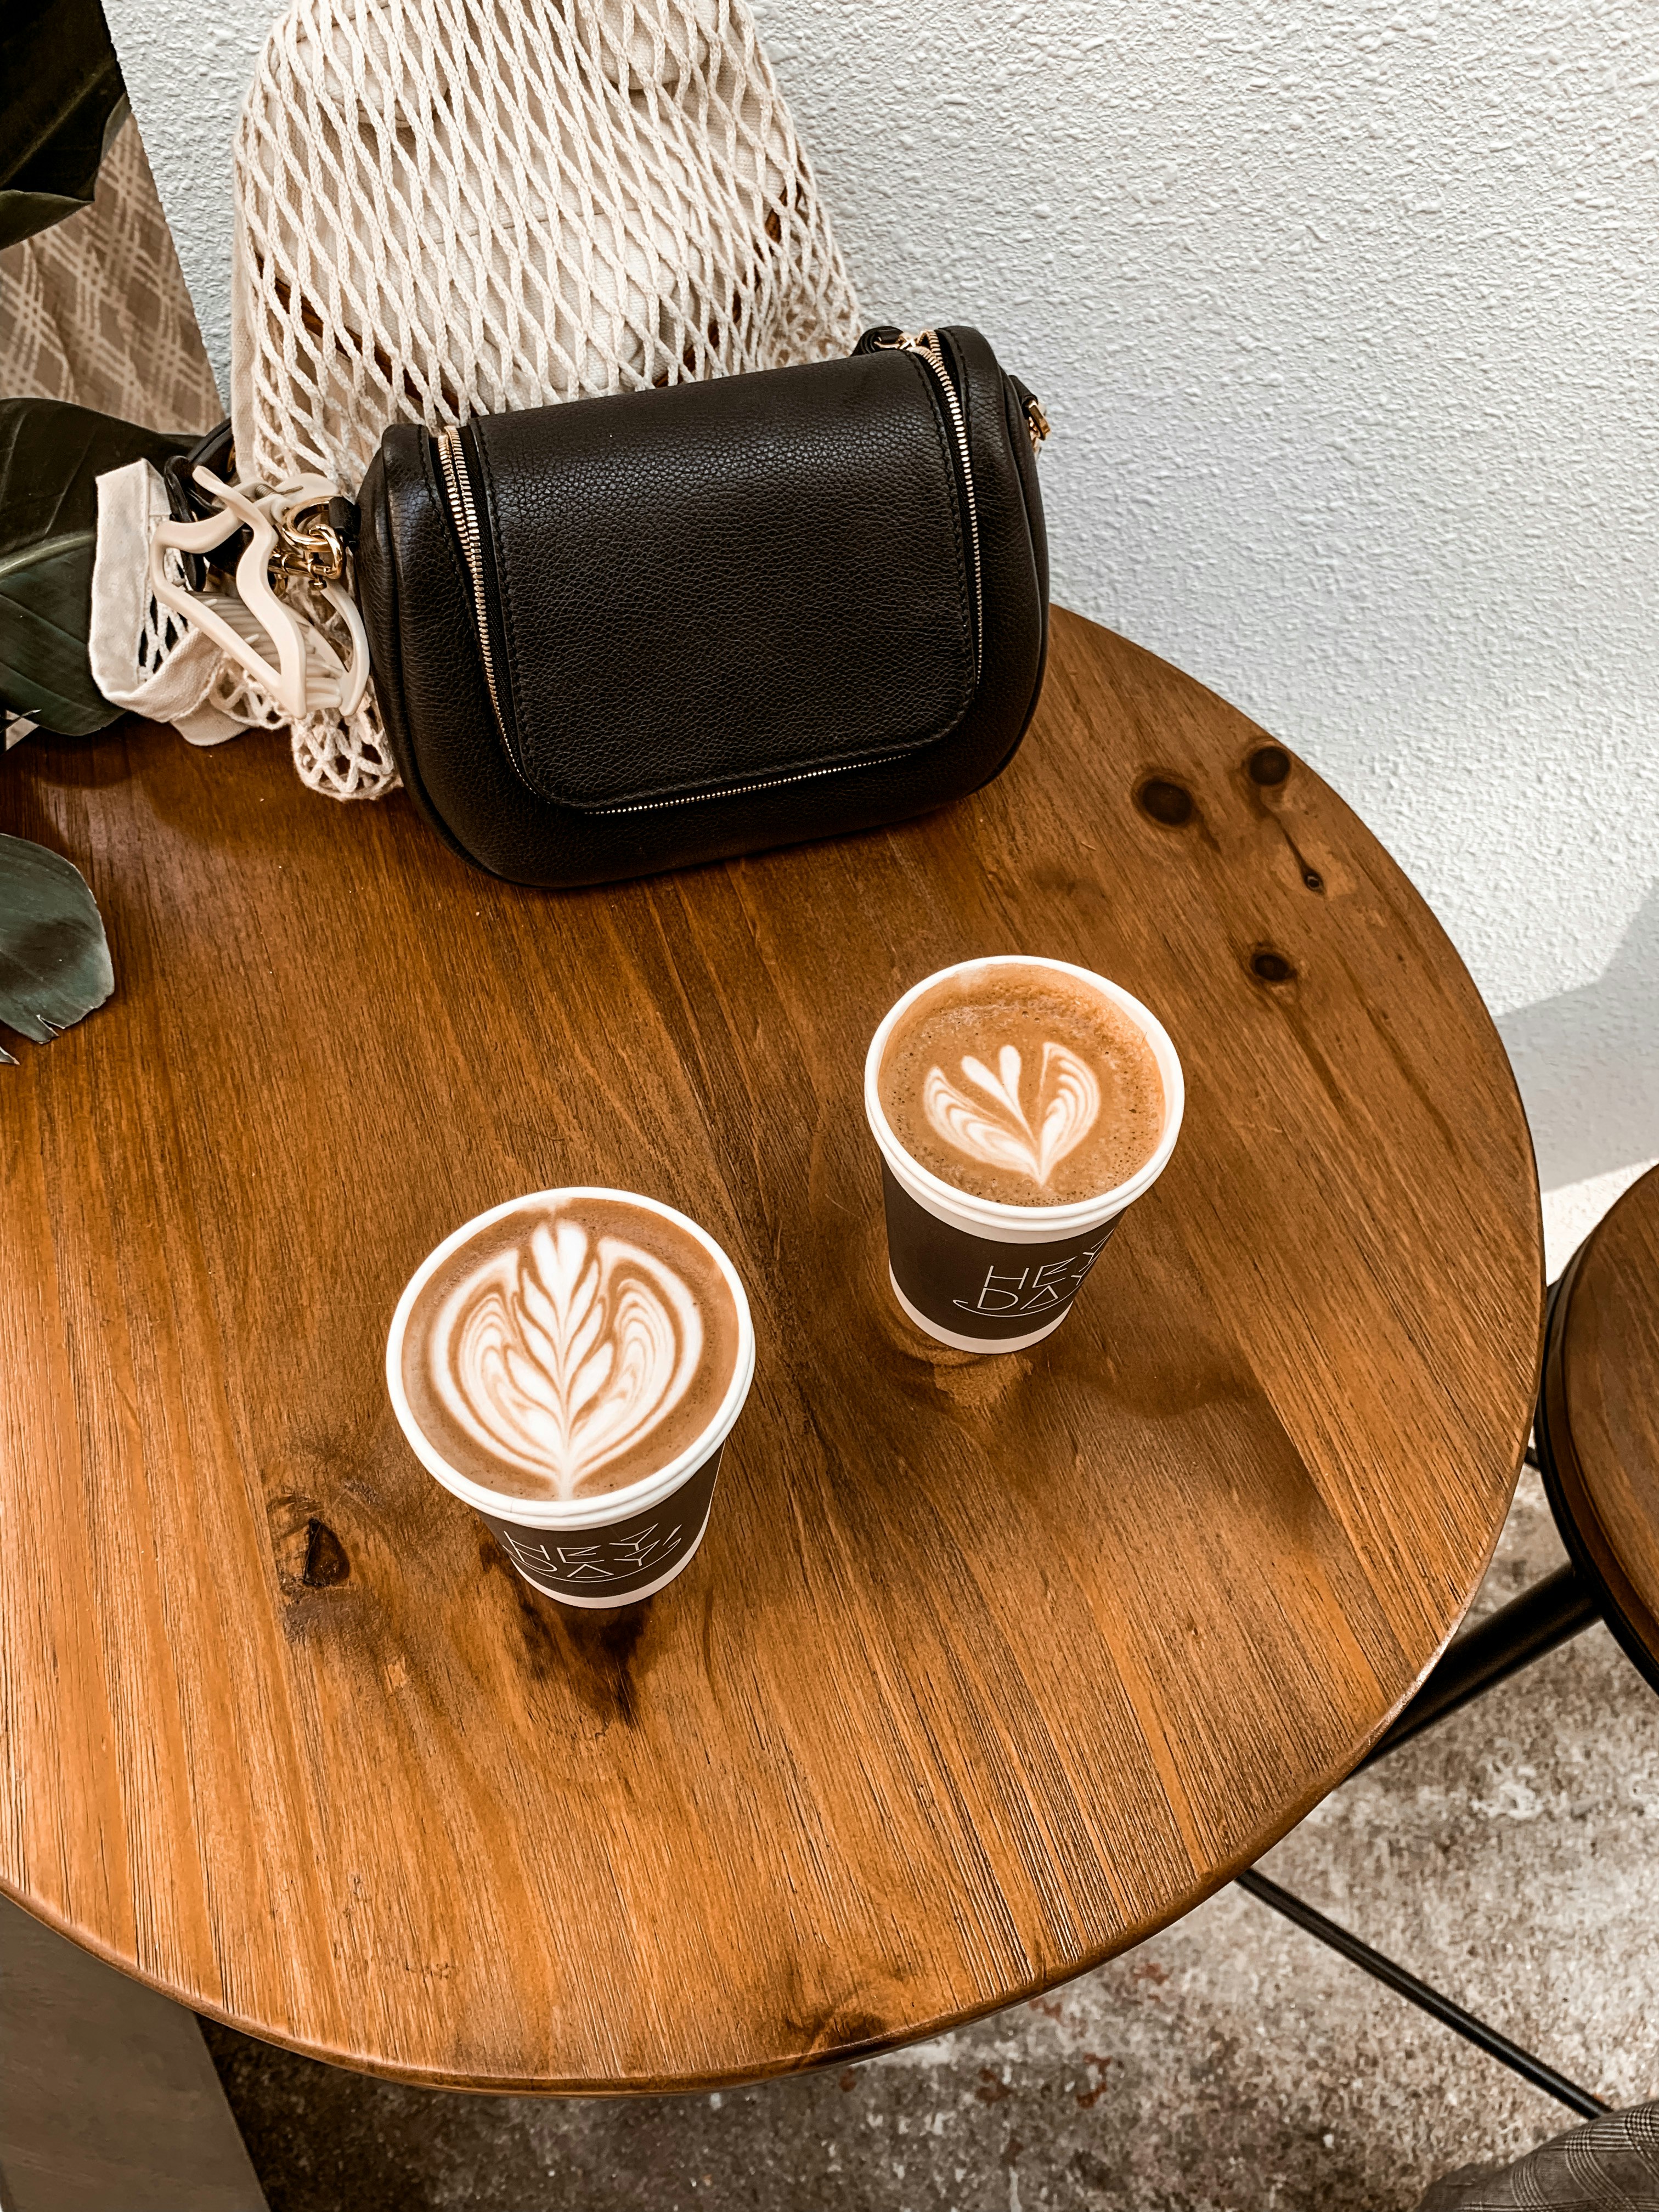 black leather bag beside cappuccino in white ceramic mug on brown wooden table